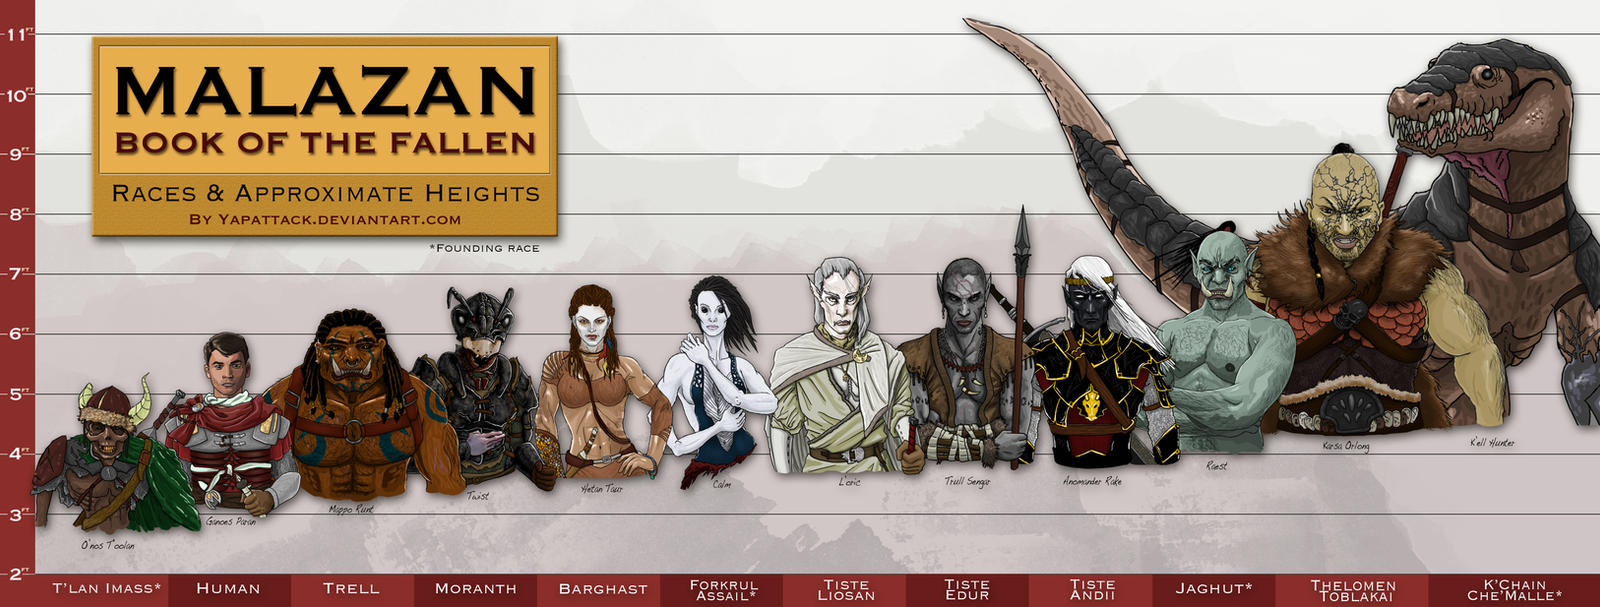 Malazan Races and Approximate Heights by YapAttack on DeviantArt